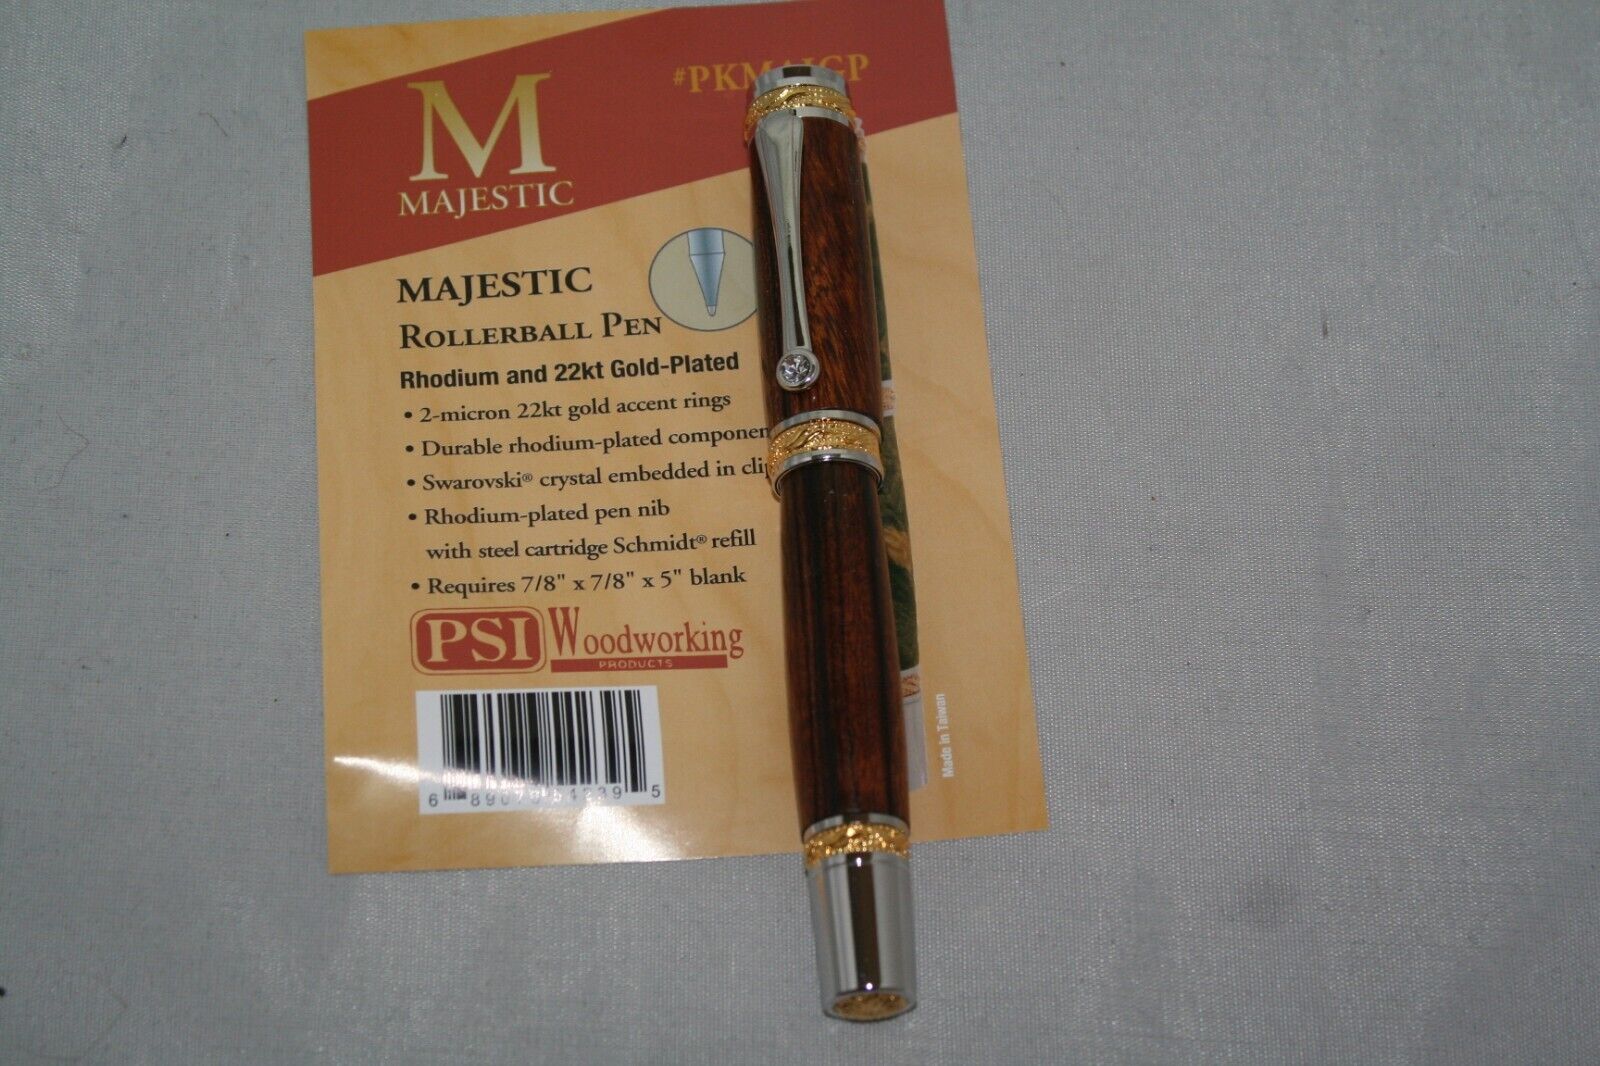 Majestic Rollerball Pen in 22KT Gold Plate and Rhodium - AZ Desert Ironwood